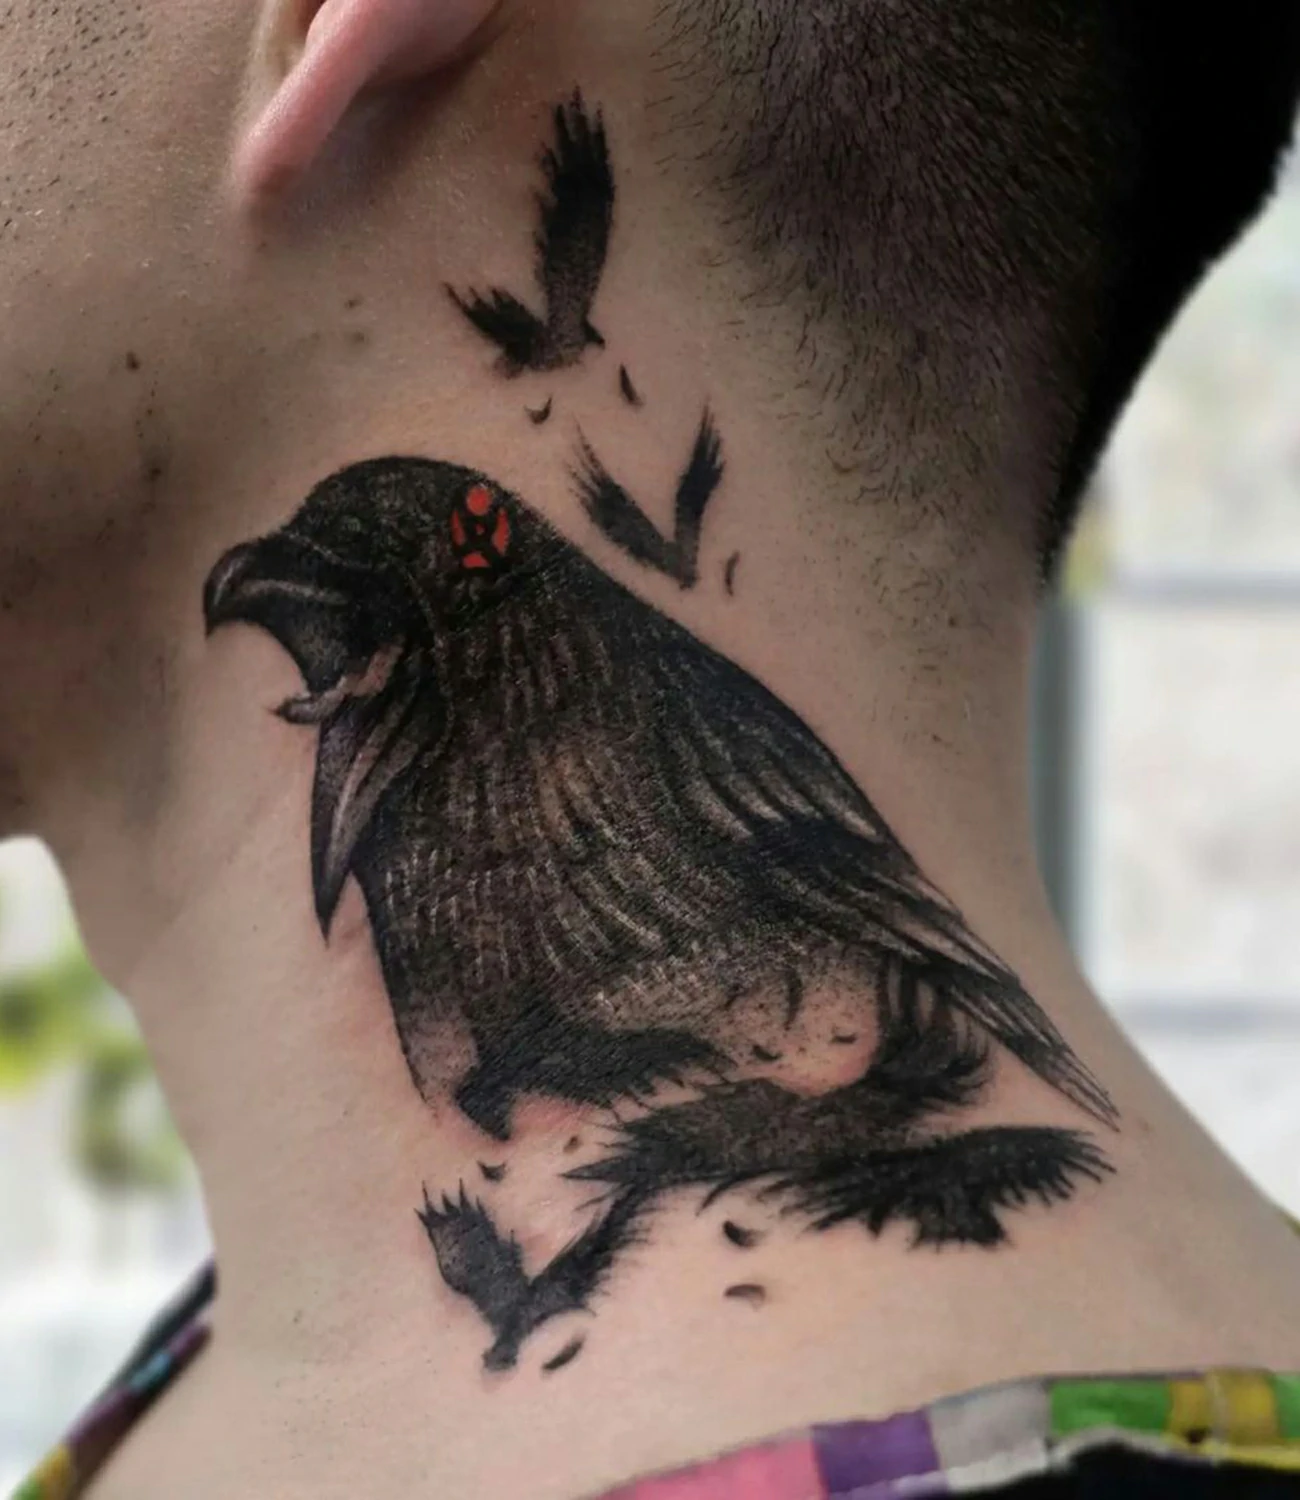 Raven neck tattoos: Tattoos designed specifically to be placed on the neck.